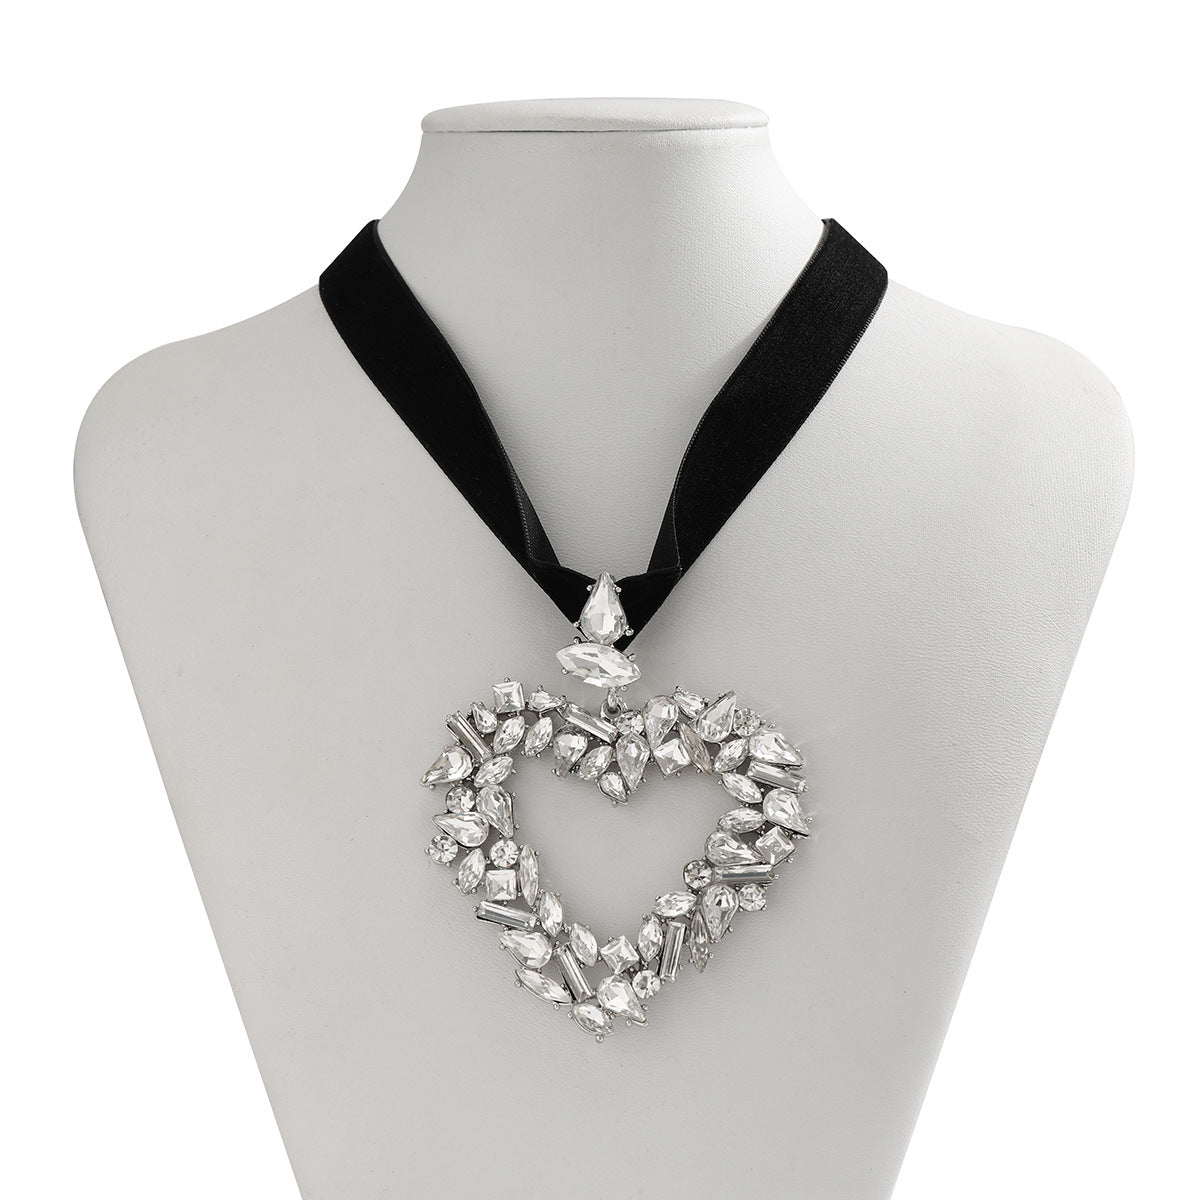 Bold Love Choker Jewelry Featuring European and American Cross Border, Statement Design, Luxe Plush Cloth, Water Diamond Necklace, and Accesory